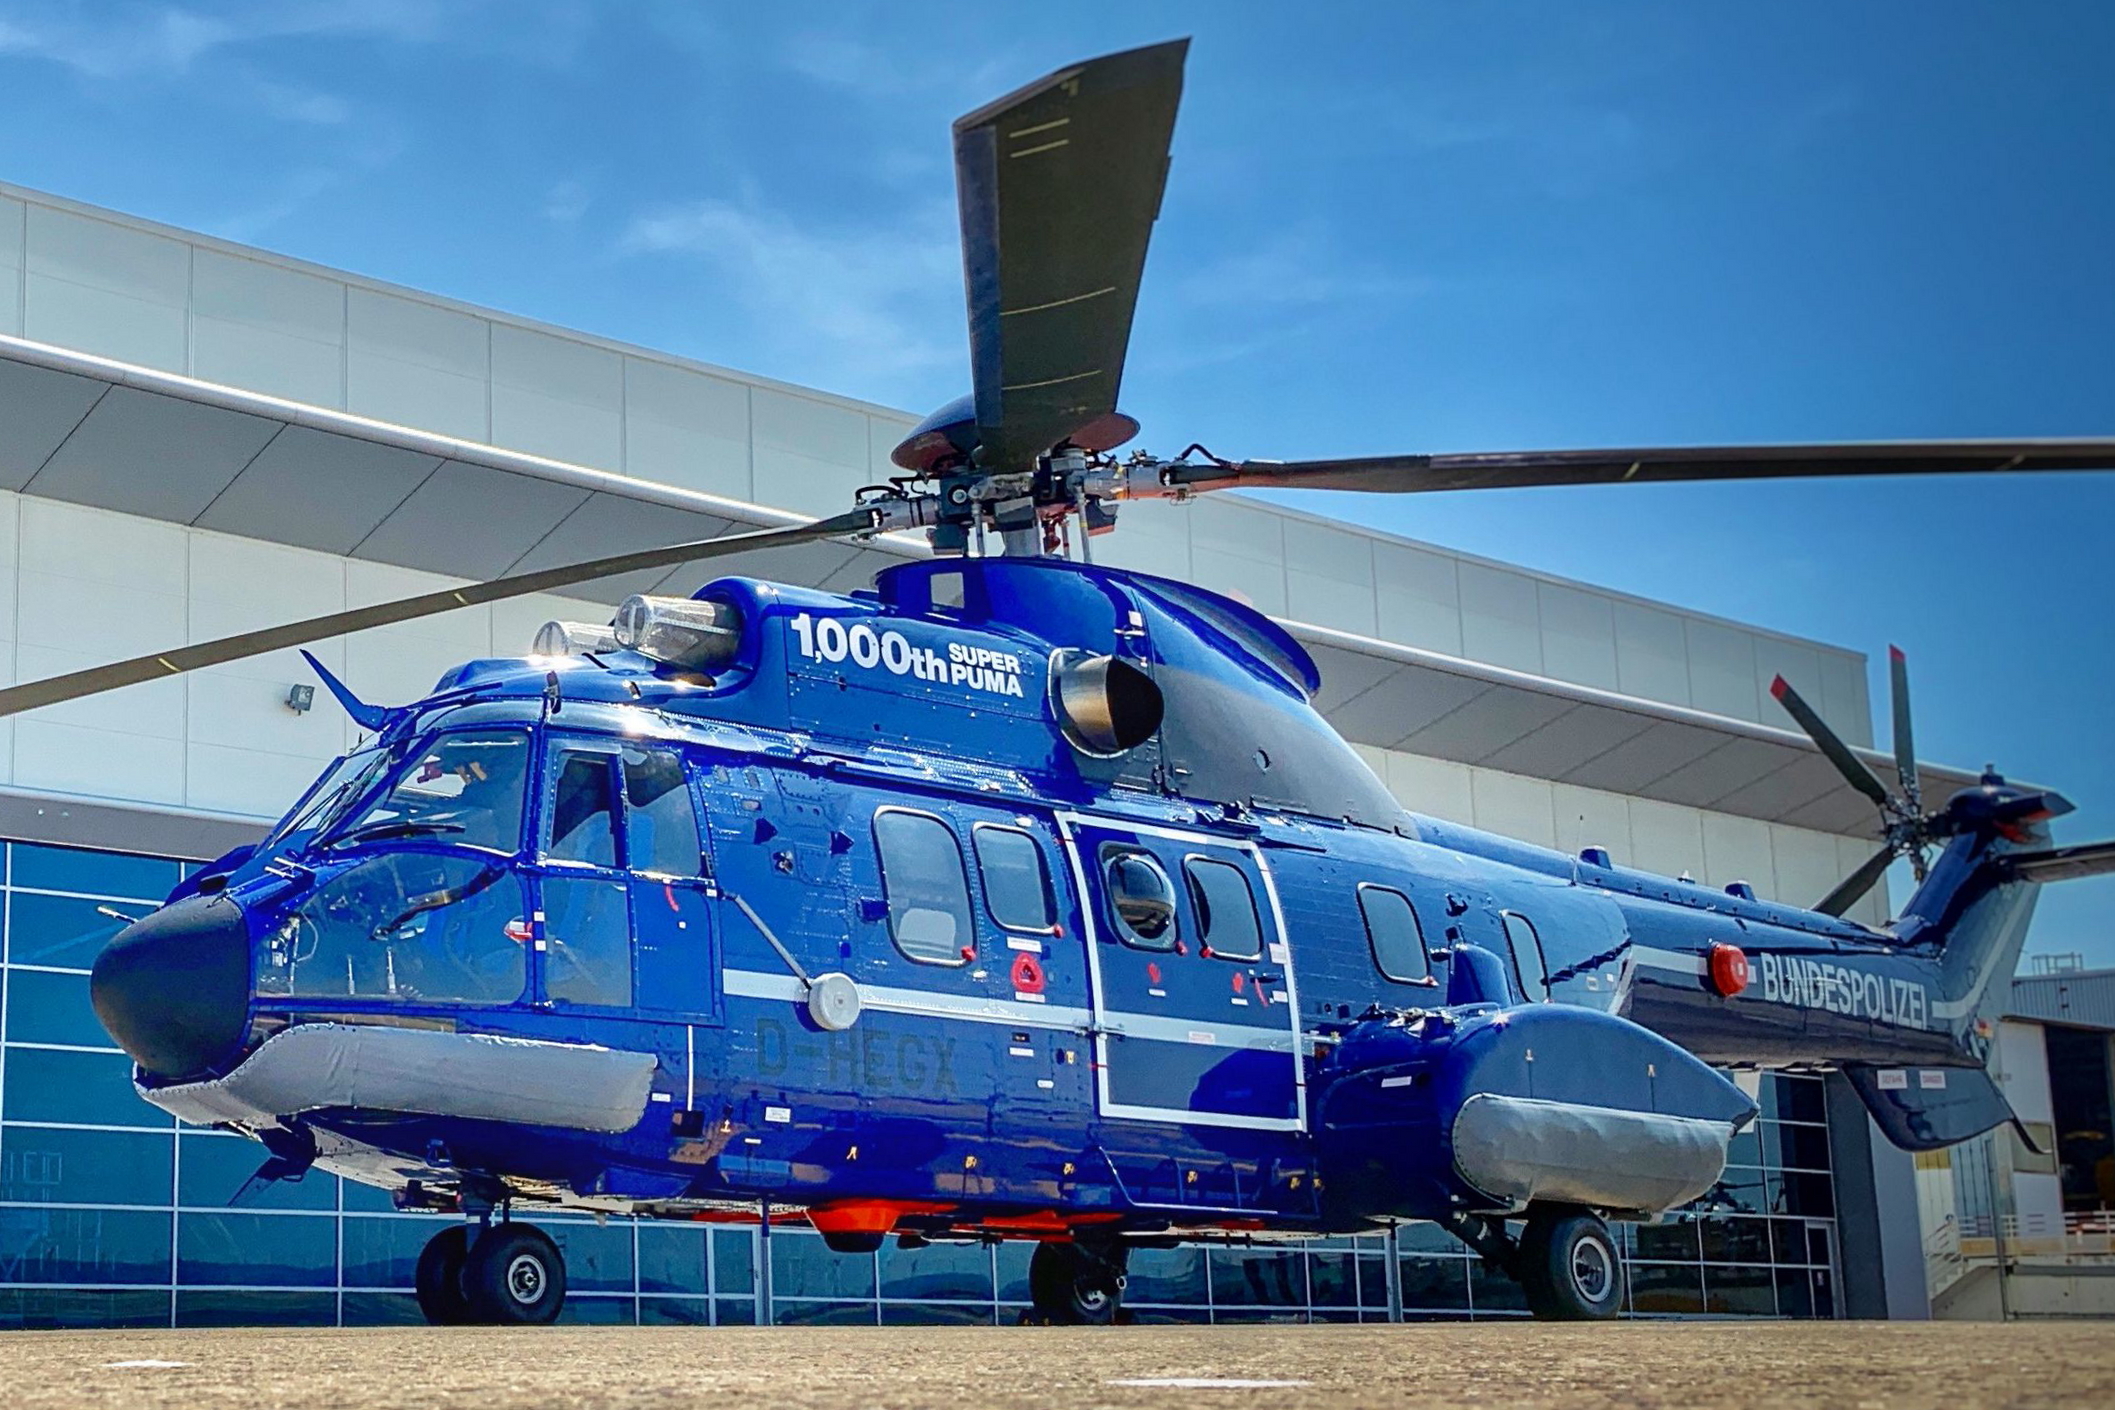 Airbus has delivered its 1,000th Super Puma helicopter, a twin-engine multi-role H215 assembled in Marignane, France, and handed over to the German Federal Police (Bundespolizei) to support the German Havarie Command, which manages maritime emergencies off of Germany’s coast. Click to enlarge.